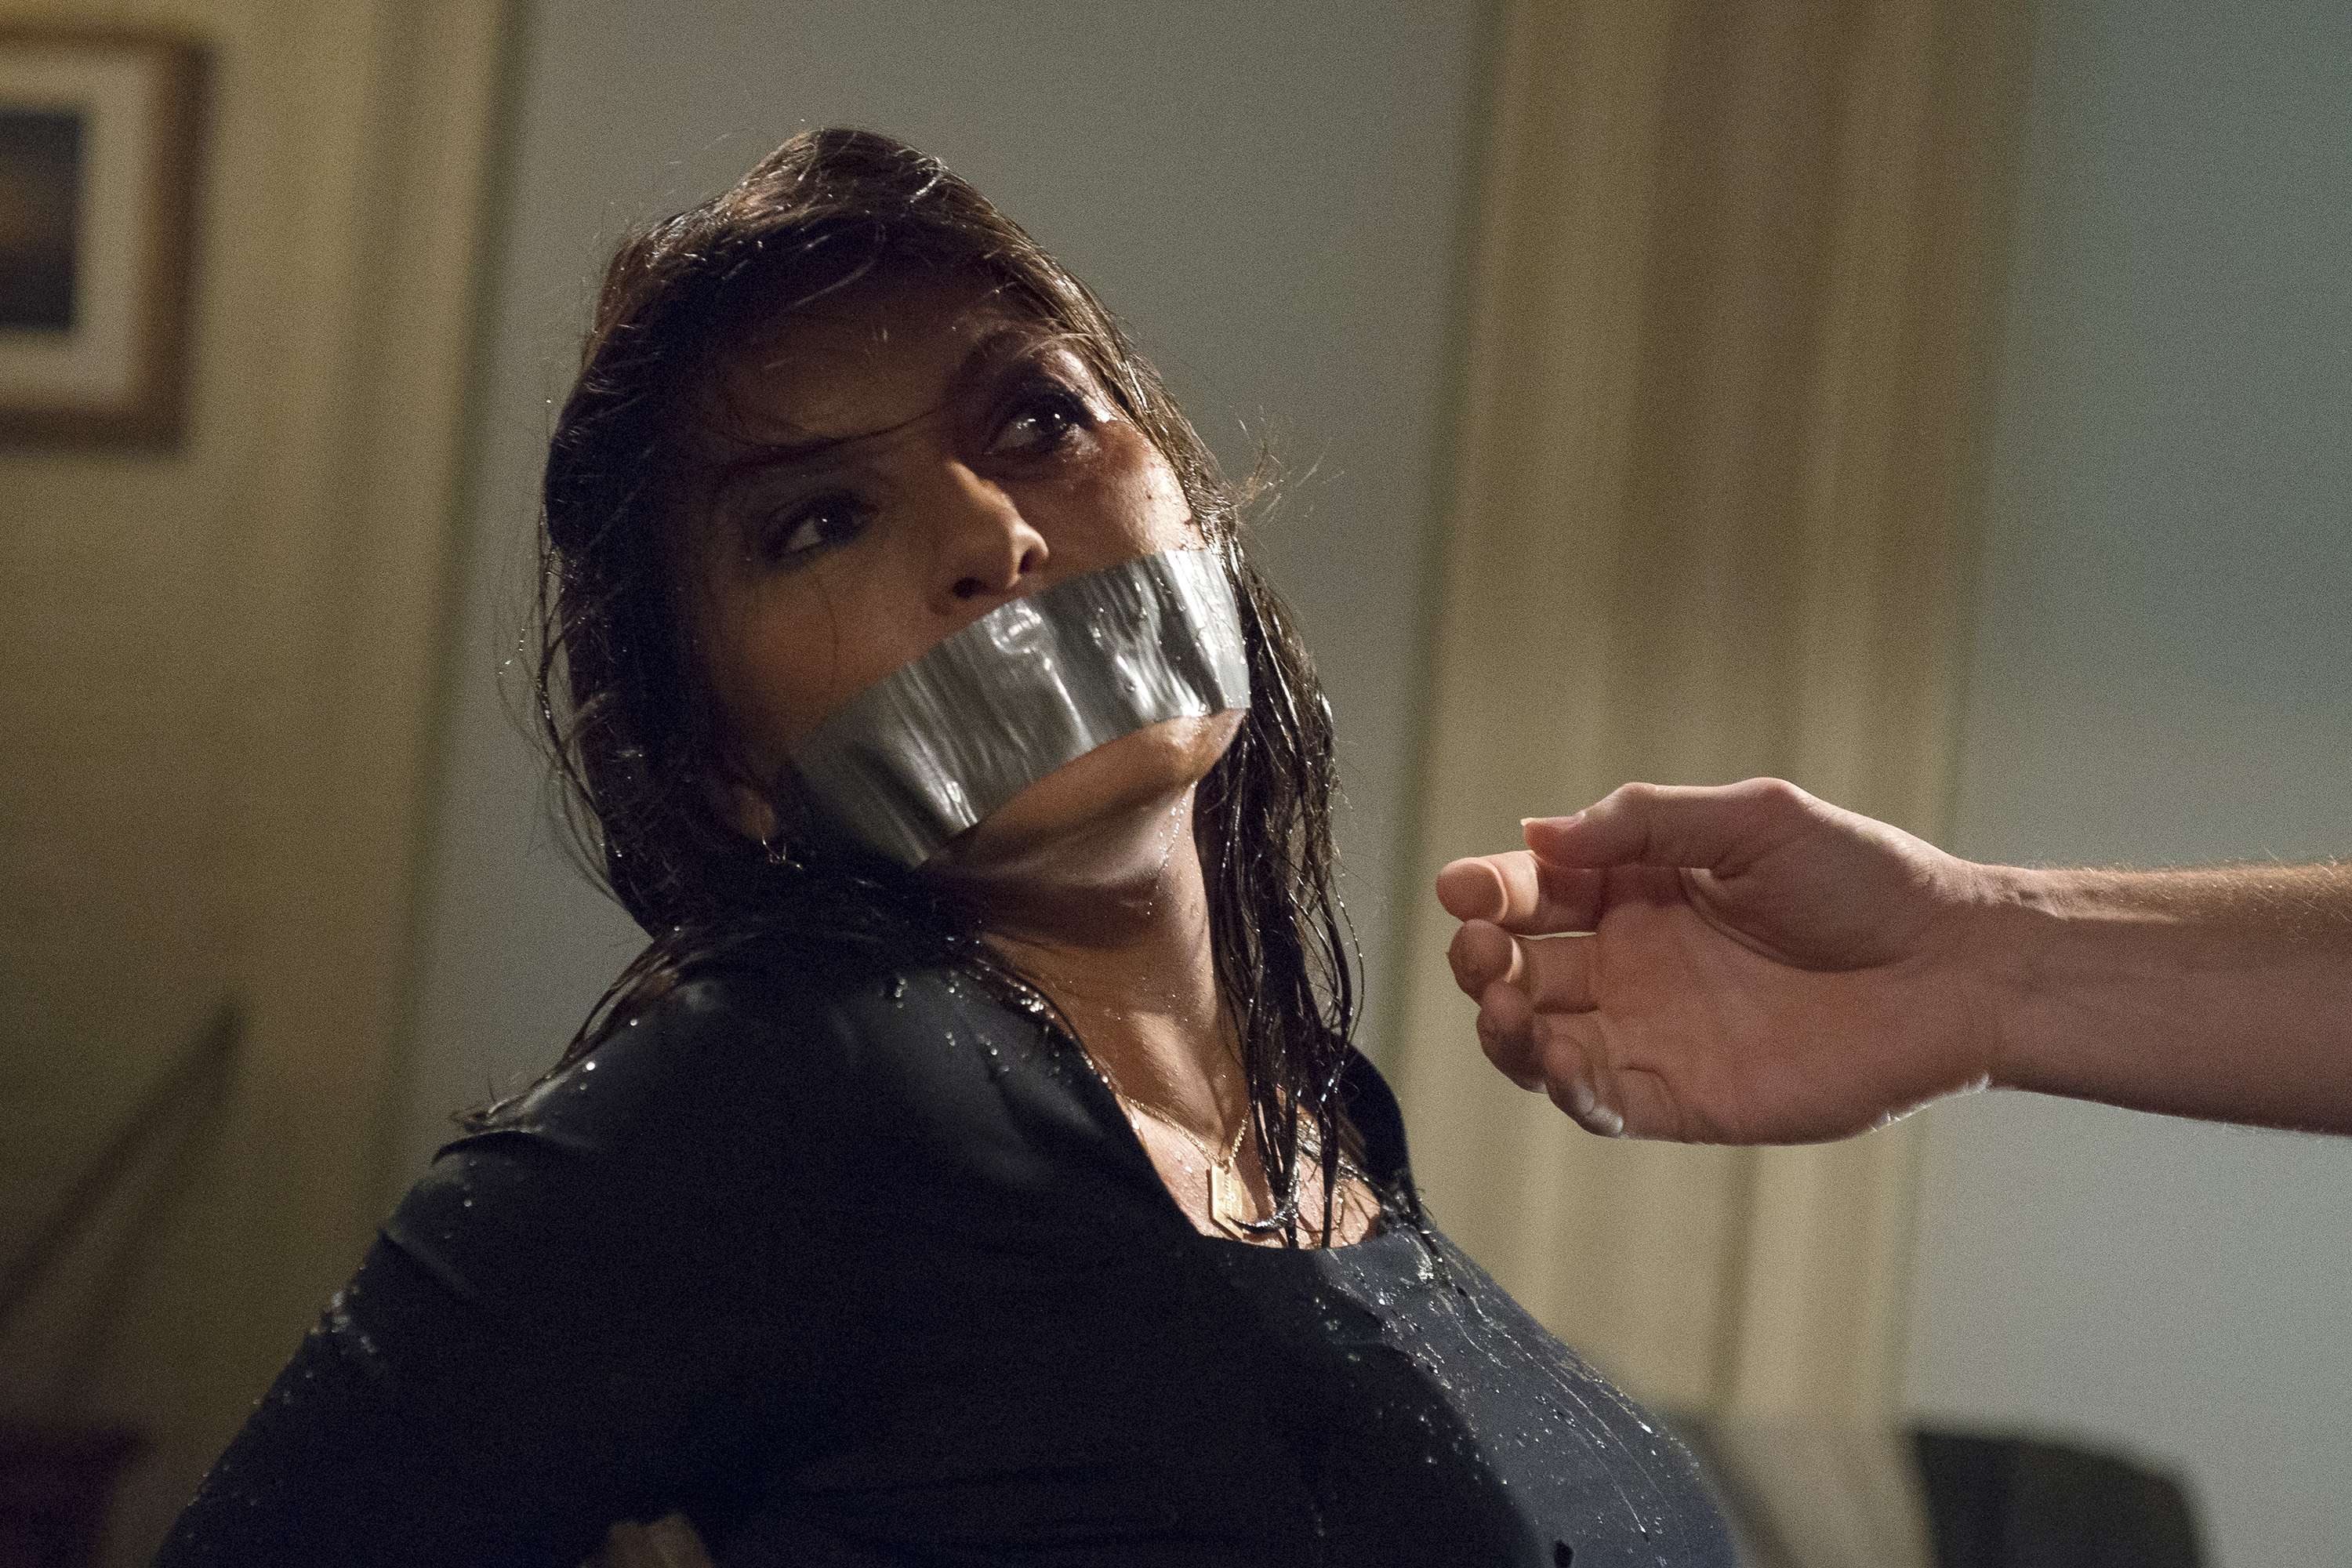 Olivia Benson with duct tape on mouth 